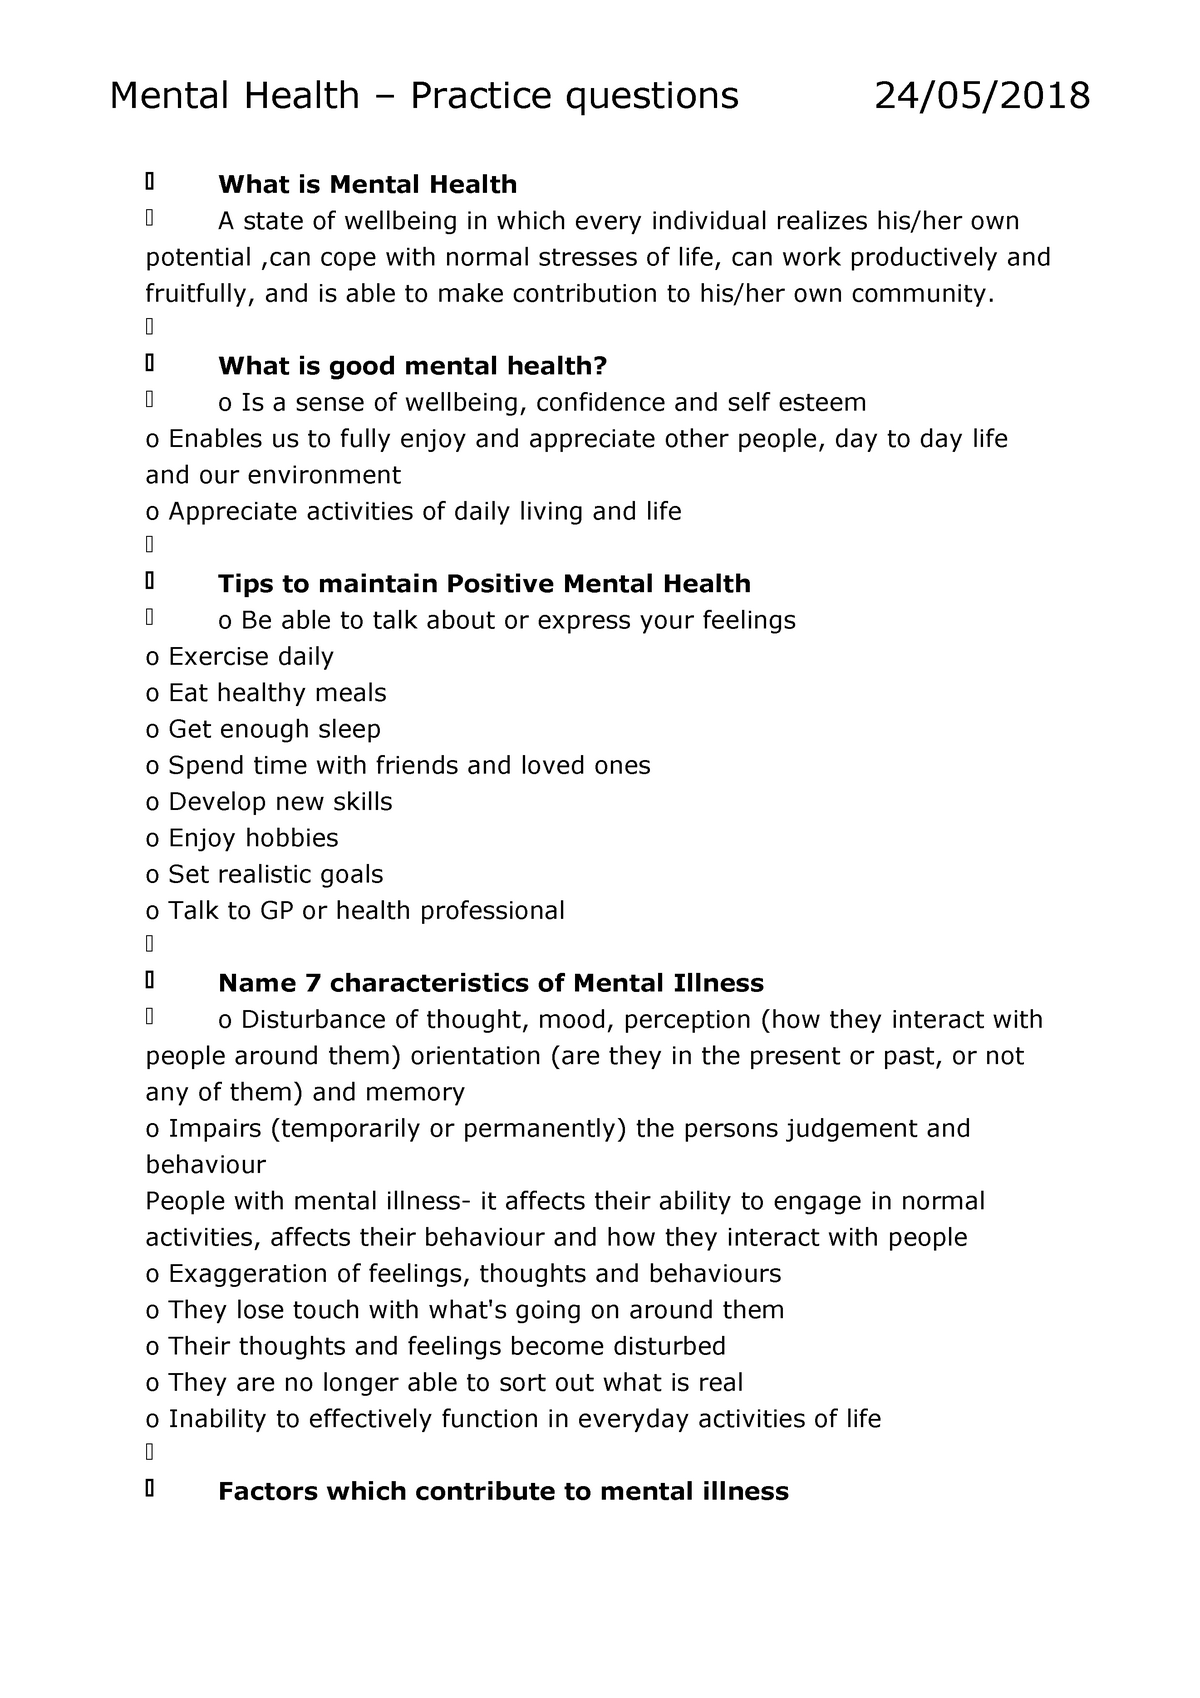 research questions about mental health examples